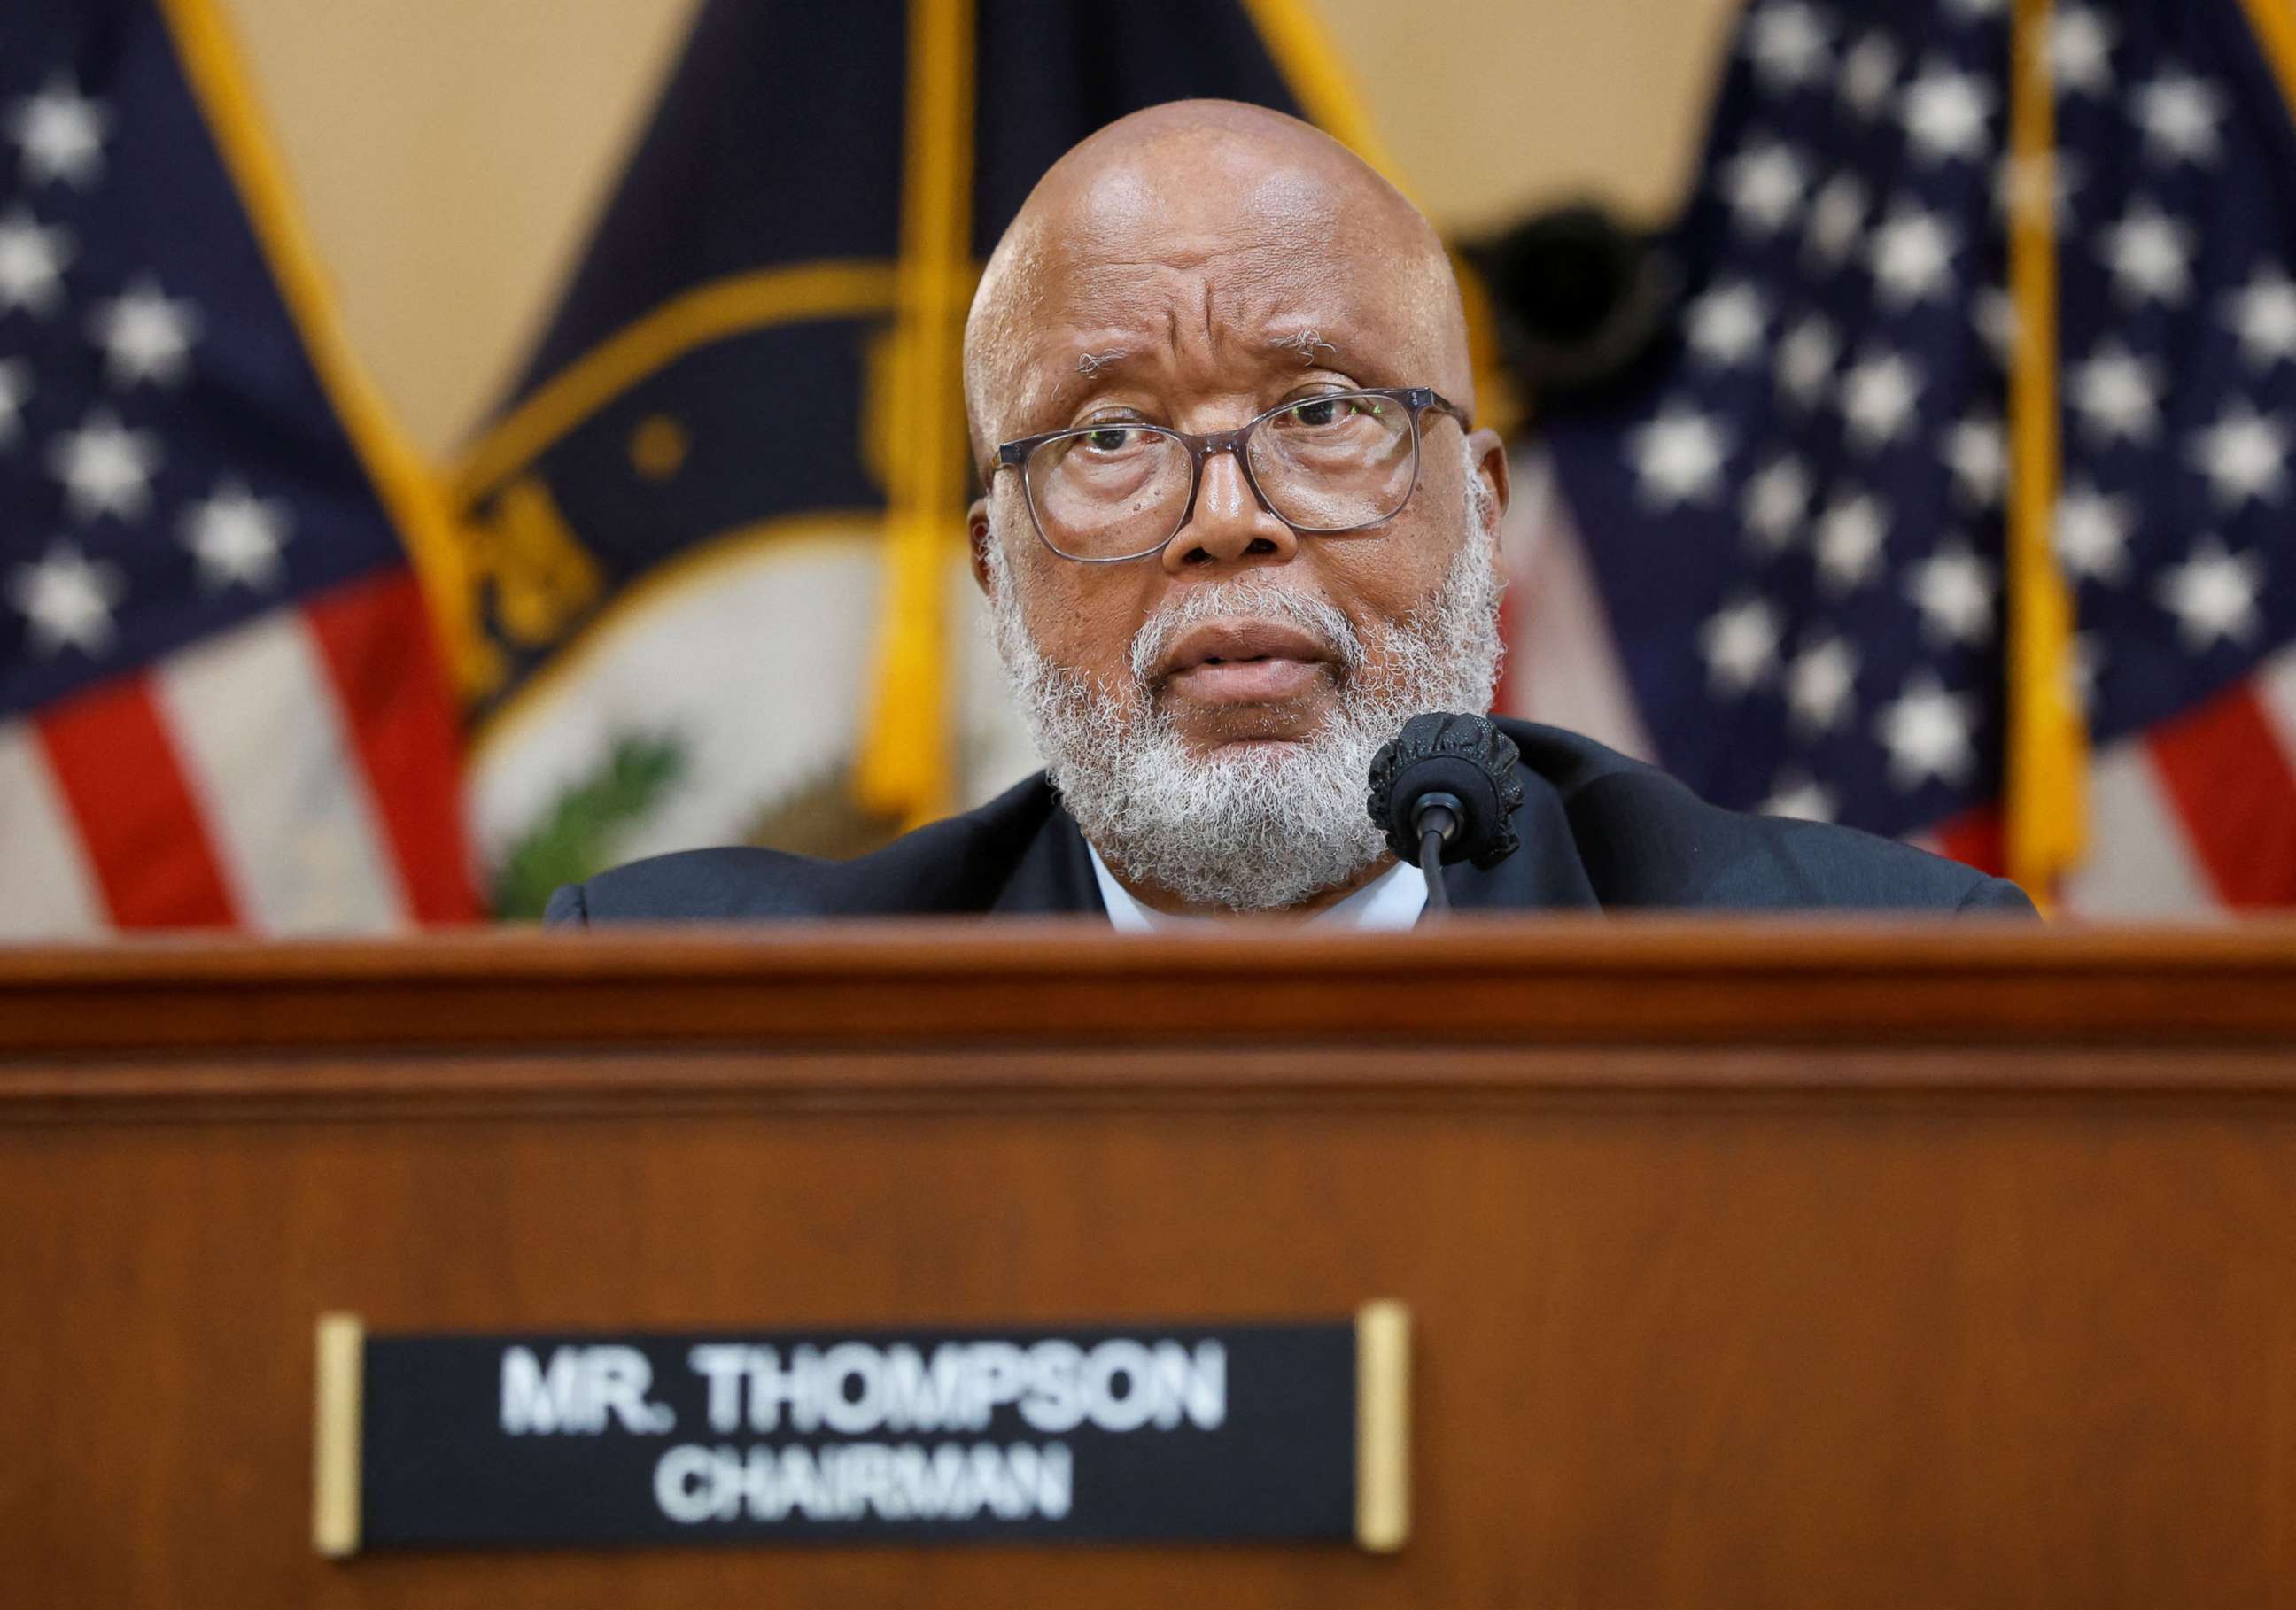 PHOTO: Chairman U.S. Representative Bennie Thompson participates in the opening public hearing of the U.S. House Select Committee to Investigate the January 6 Attack on the United States Capitol, on Capitol Hill in Washington, D.C., June 9, 2022.